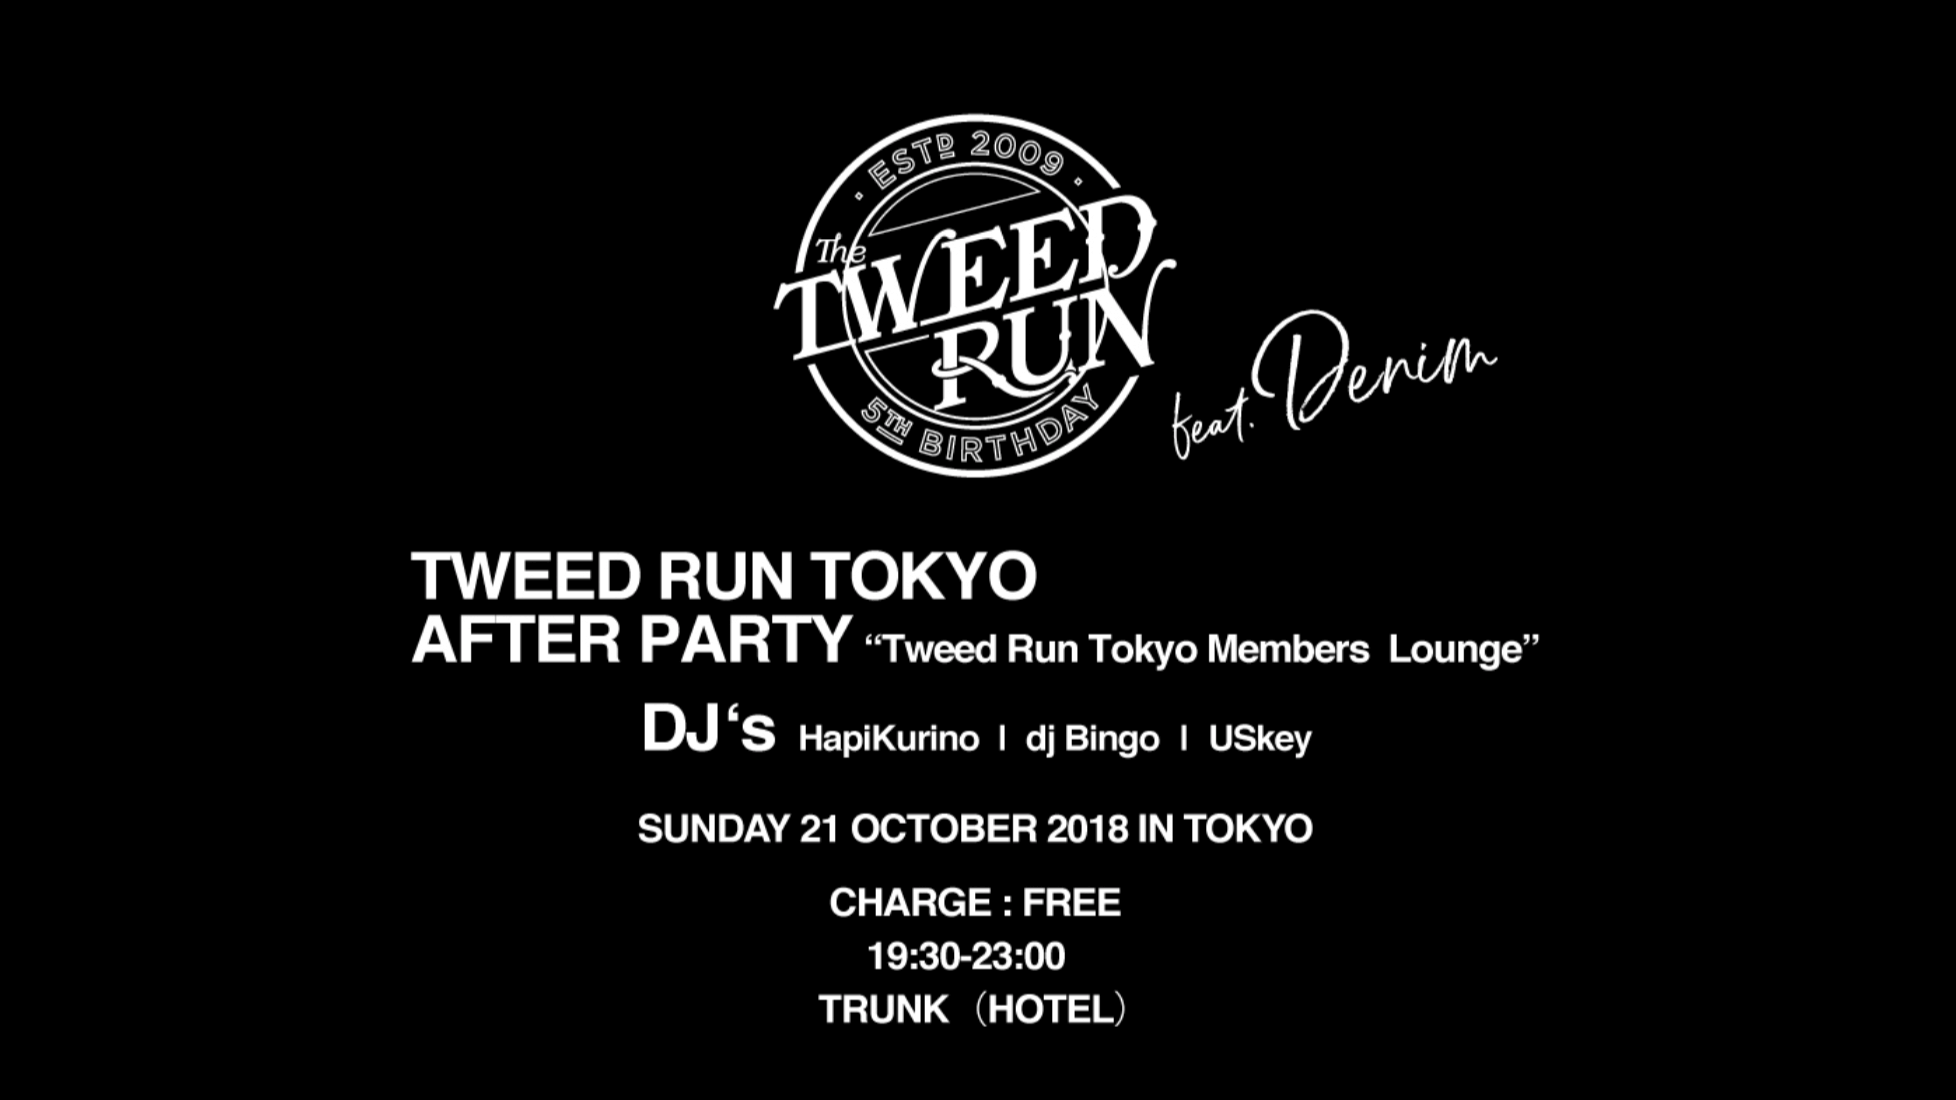 TWEED RUN TOKYO AFTER PARTY